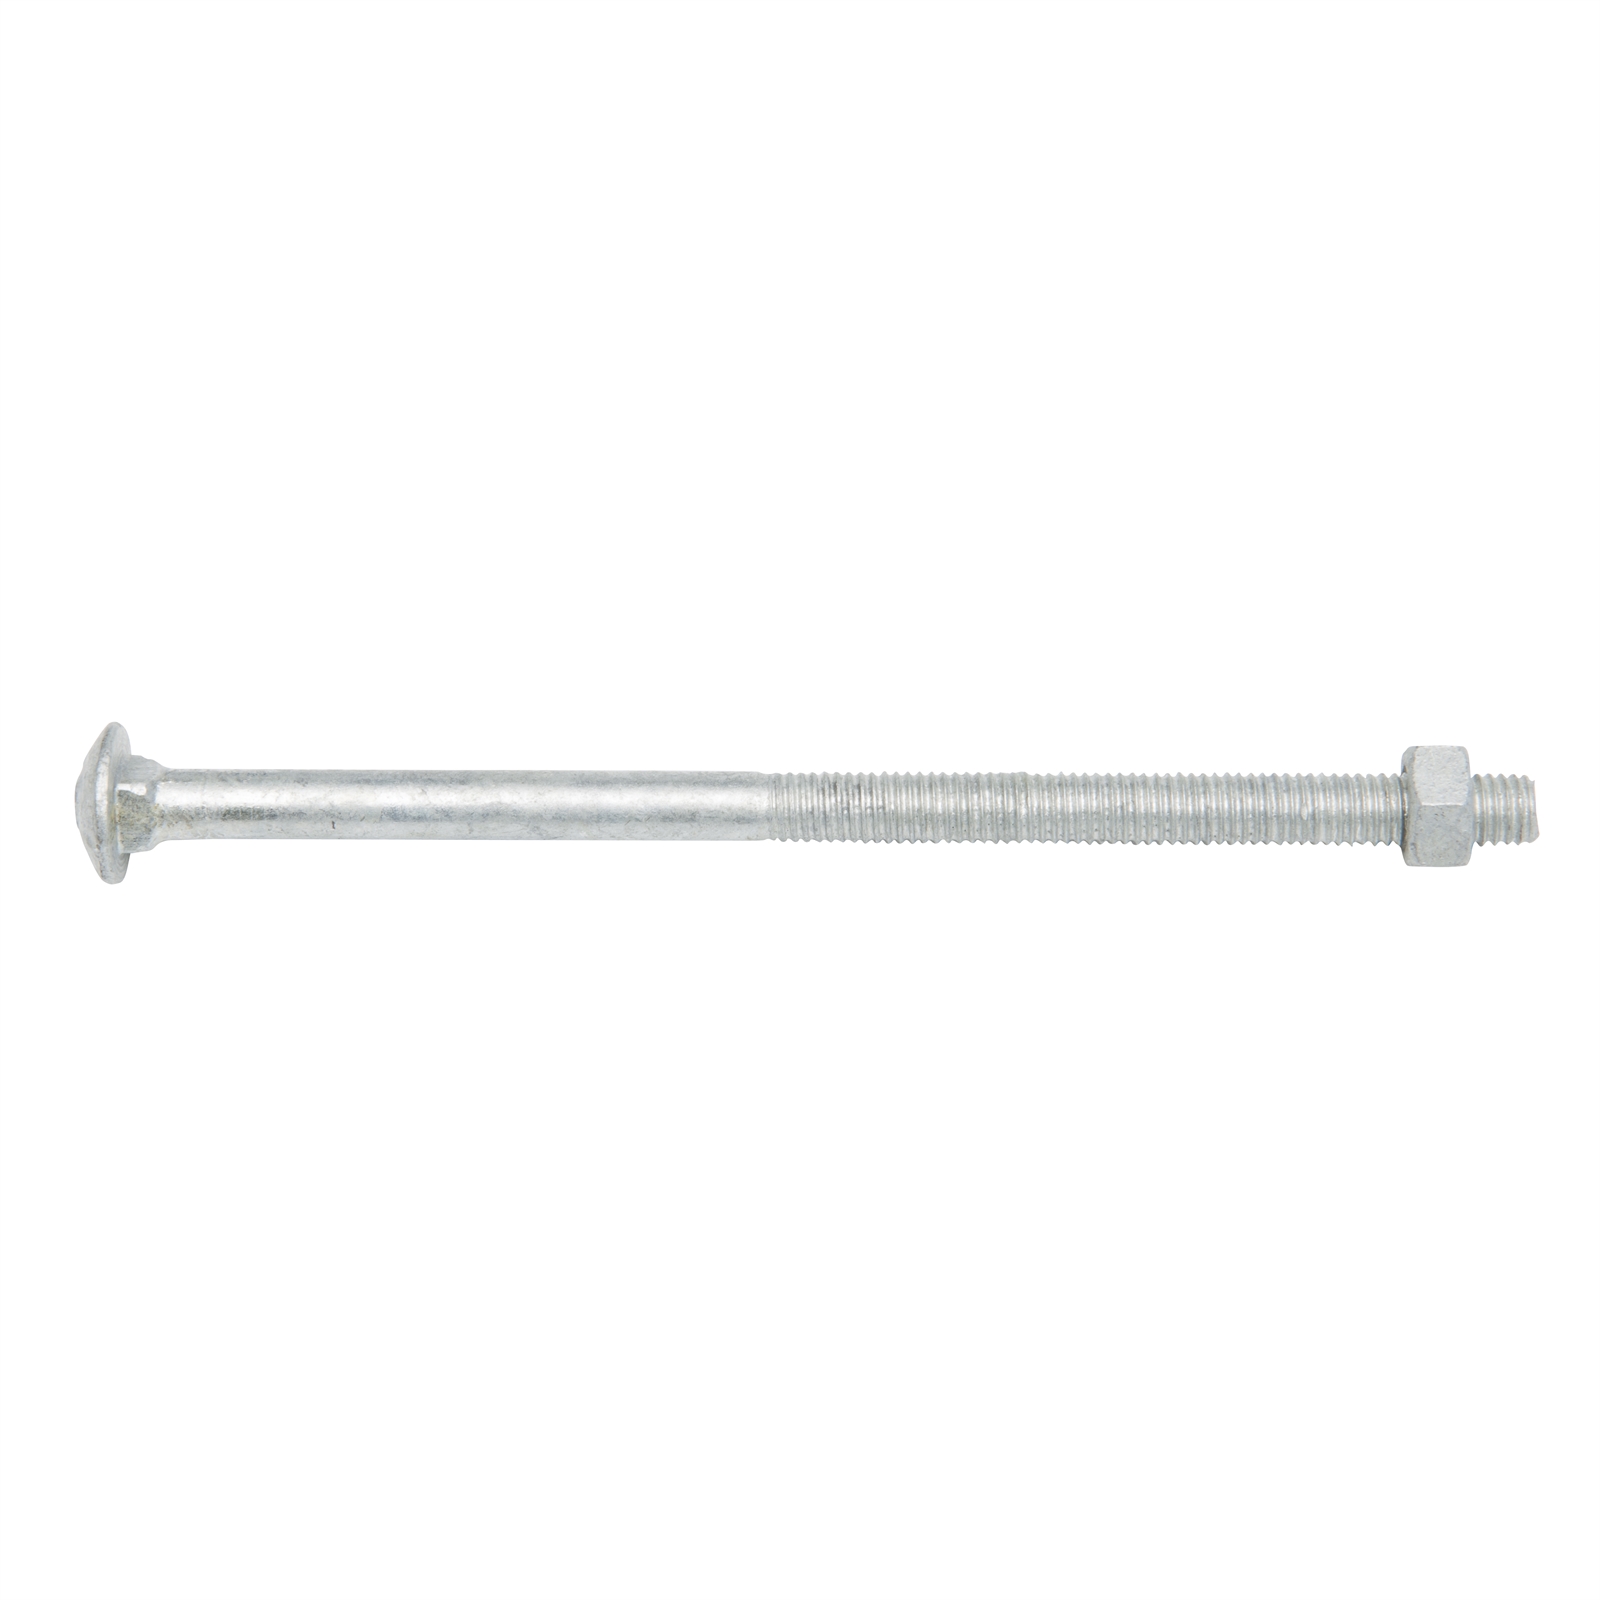 Zenith M8 x 150mm Galvanised Cup Head Bolt and Nut